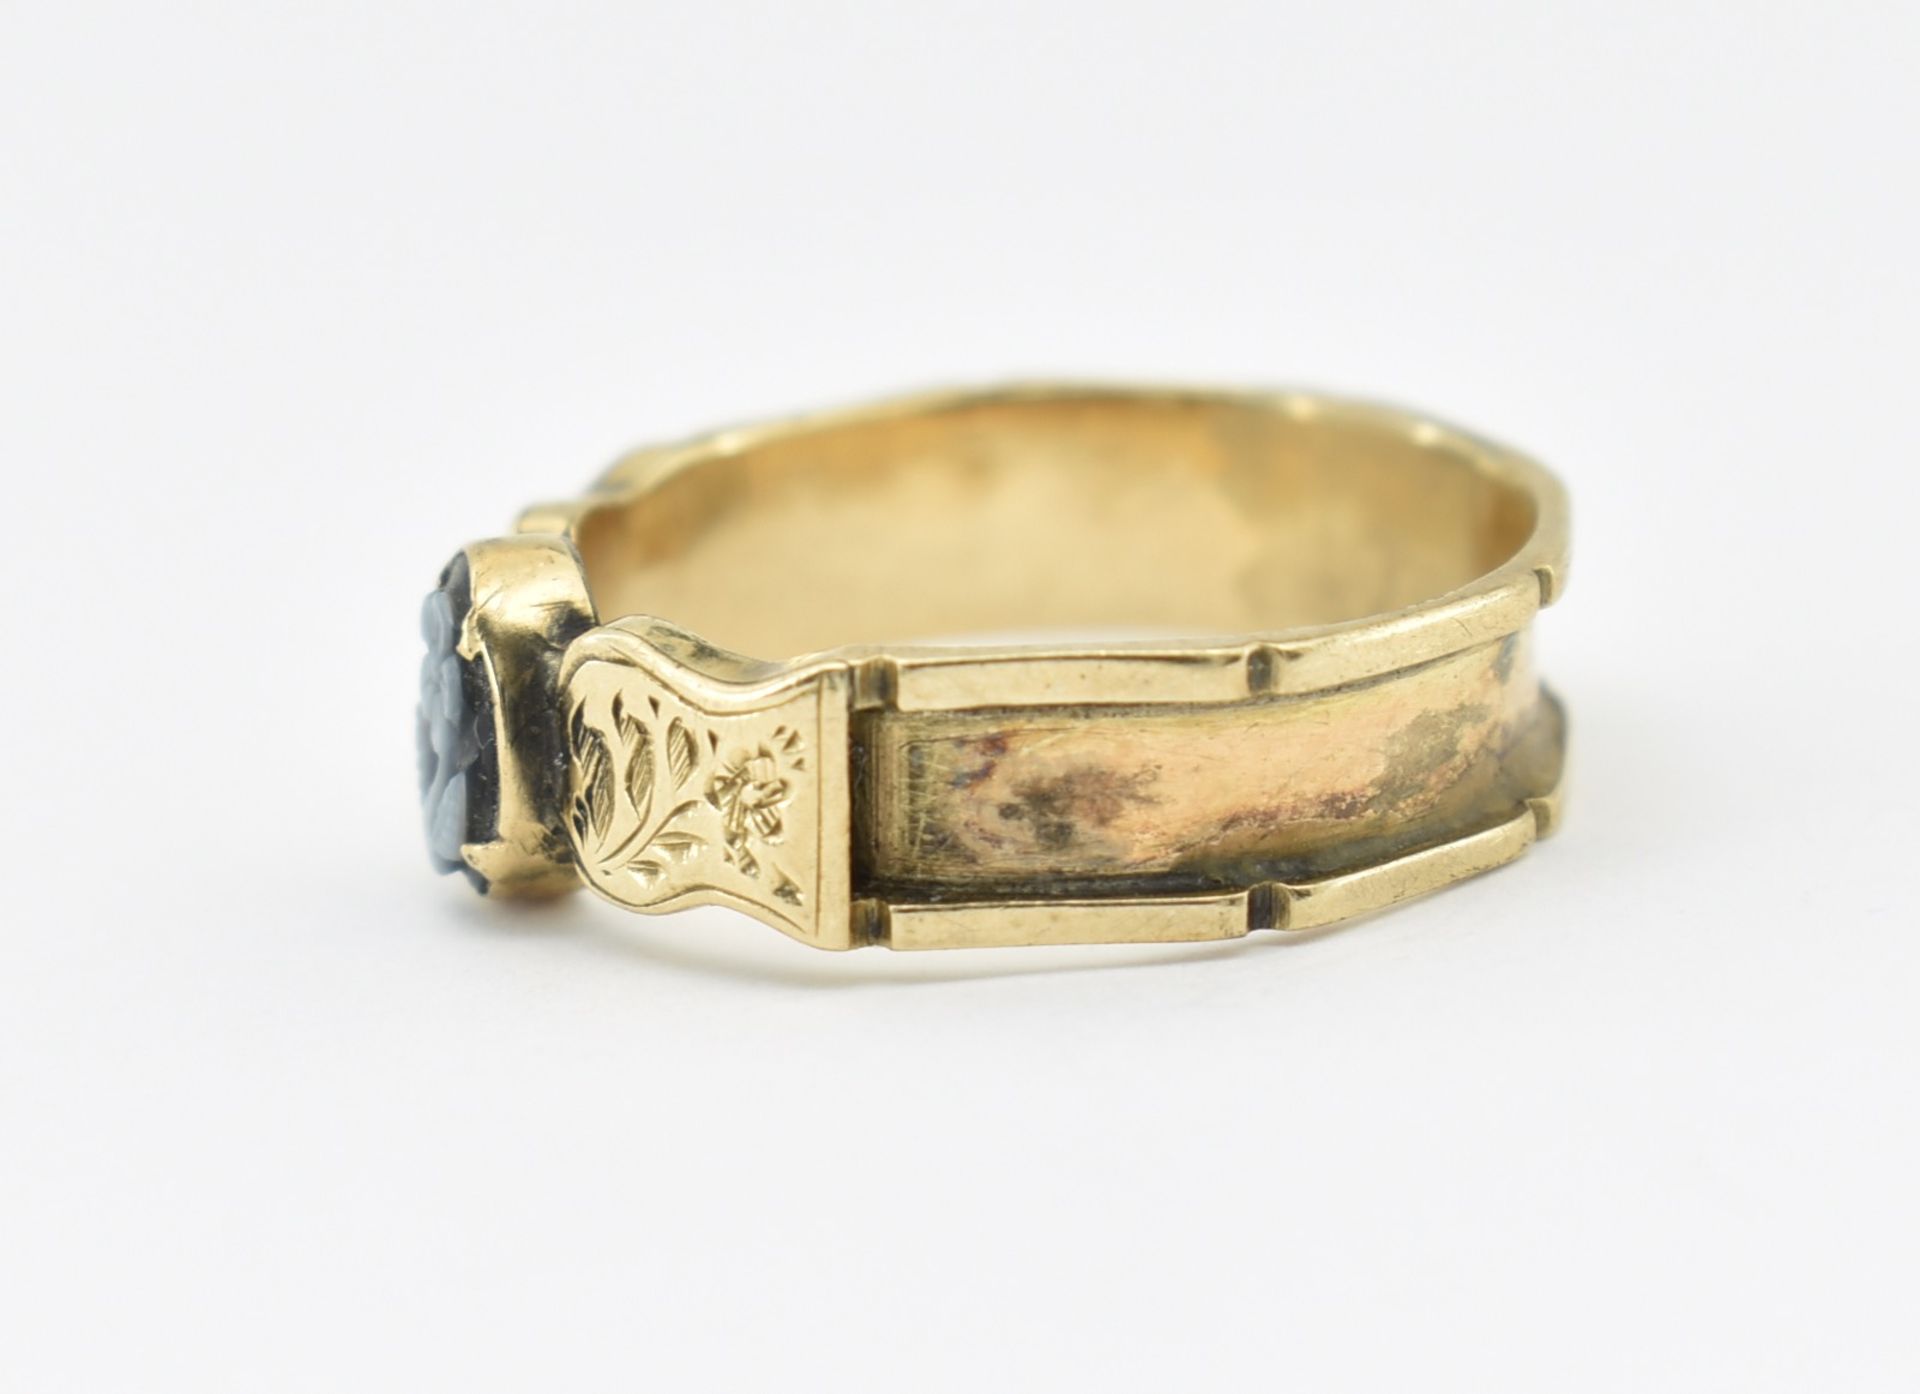 VICTORIAN 19TH CENTURY ONYX CARVED CAMEO MOURNING RING - Image 4 of 4